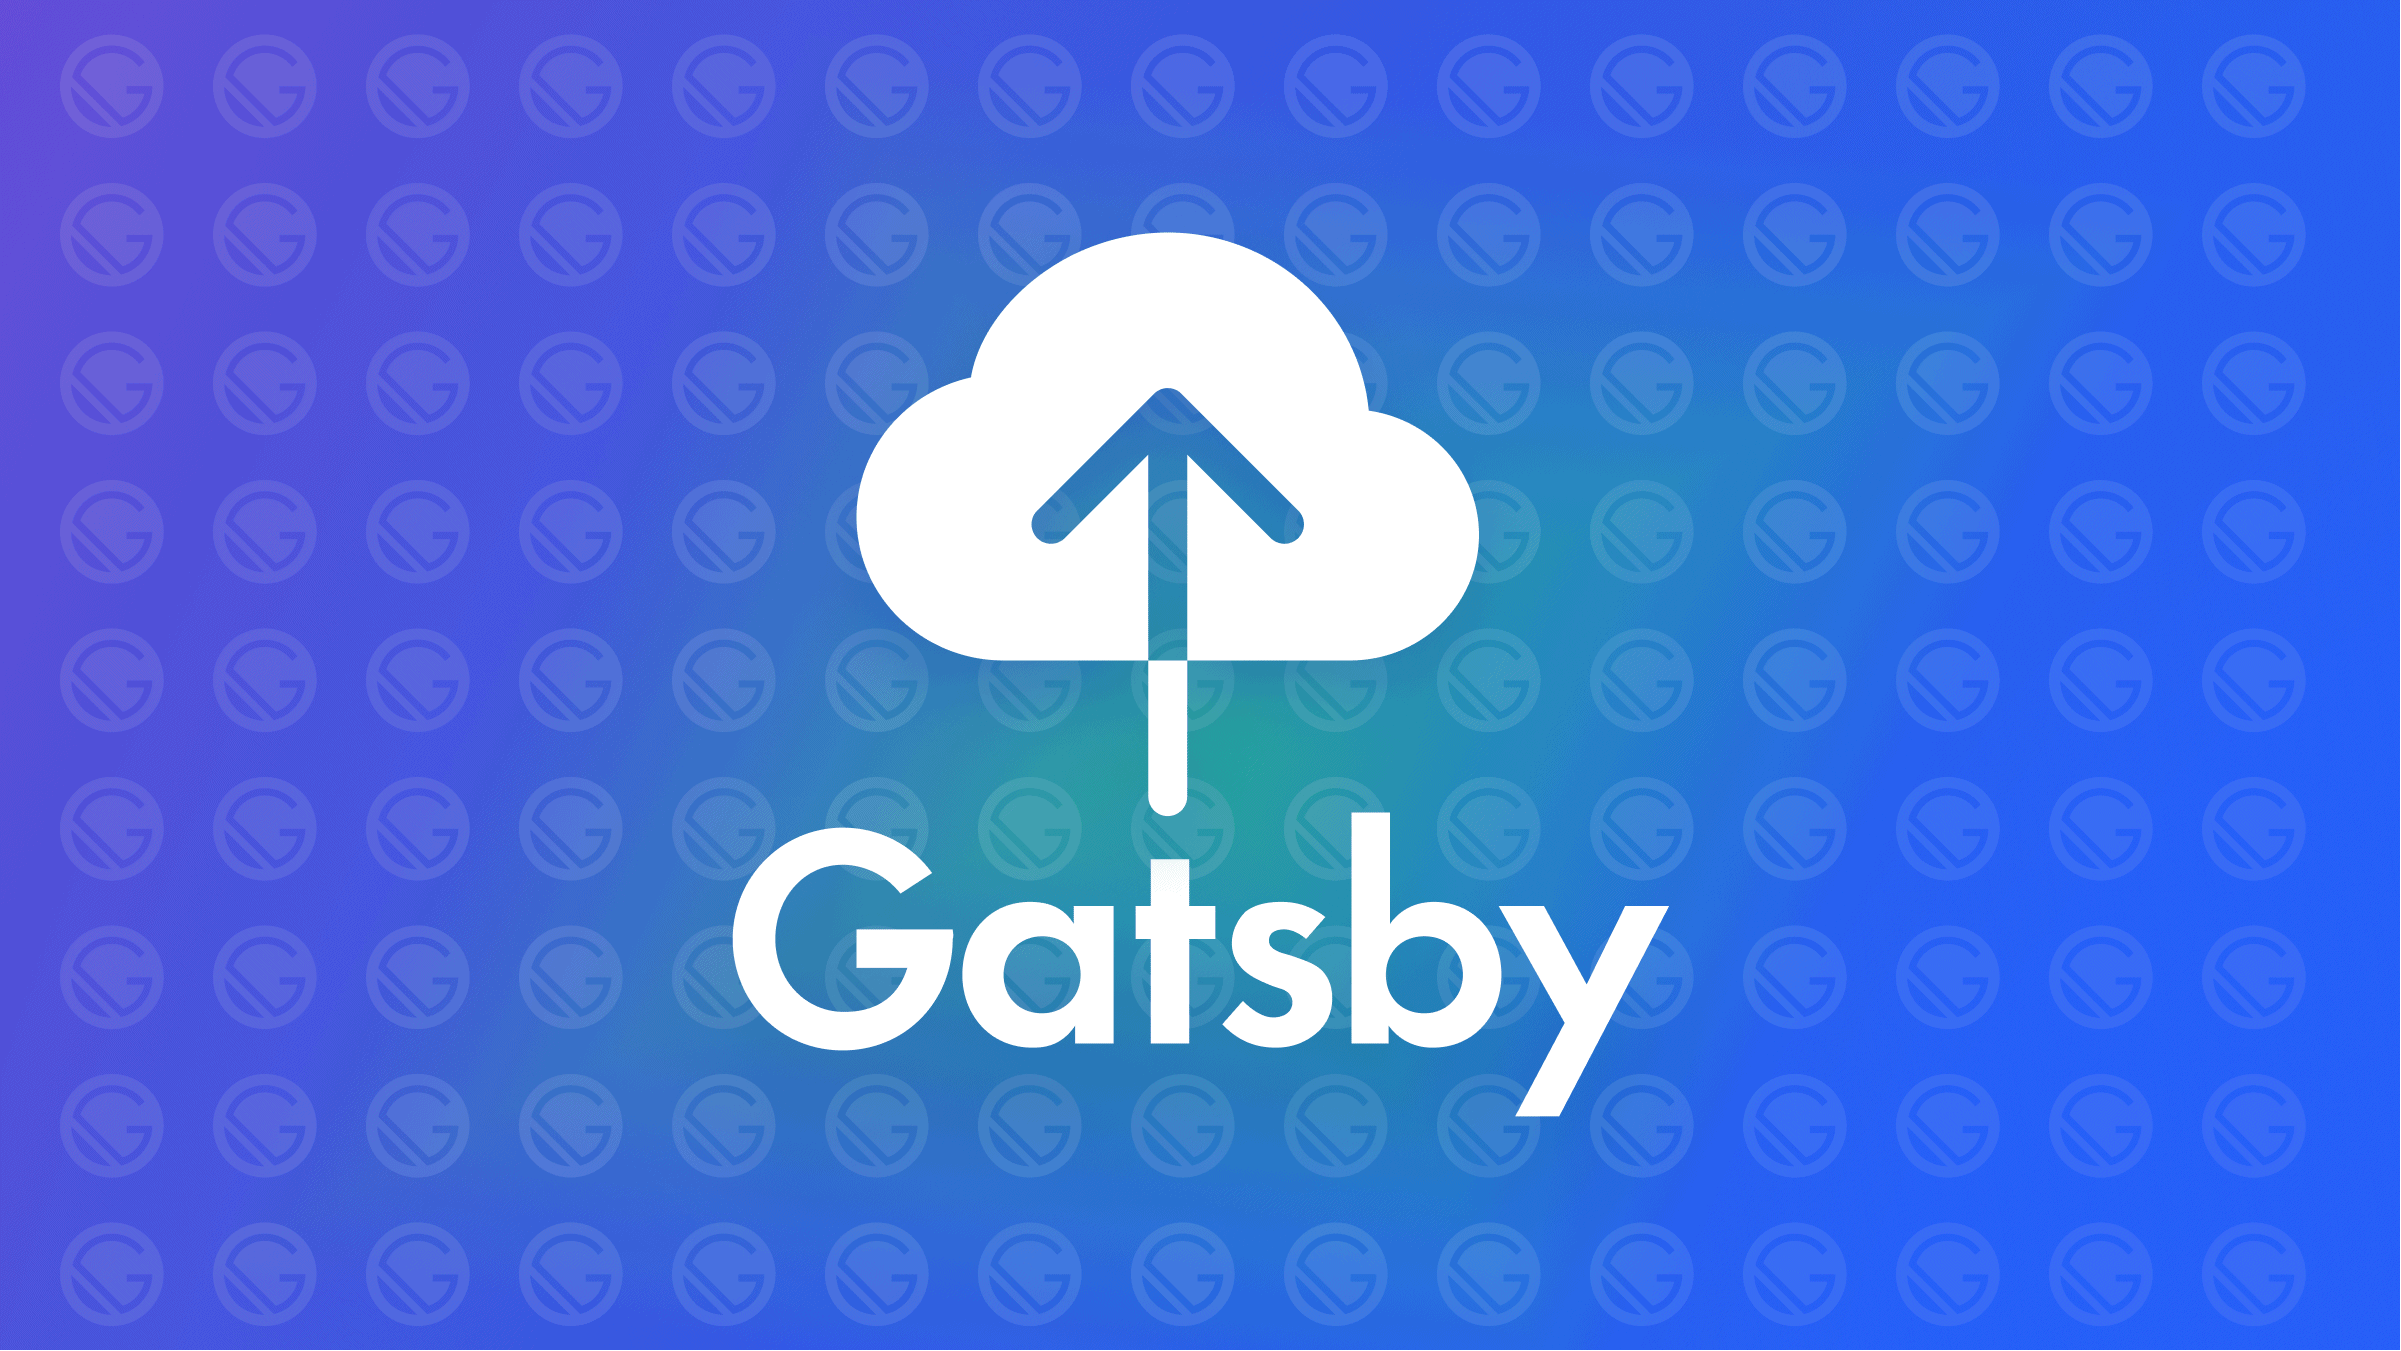 Content Management Systems for Gatsby